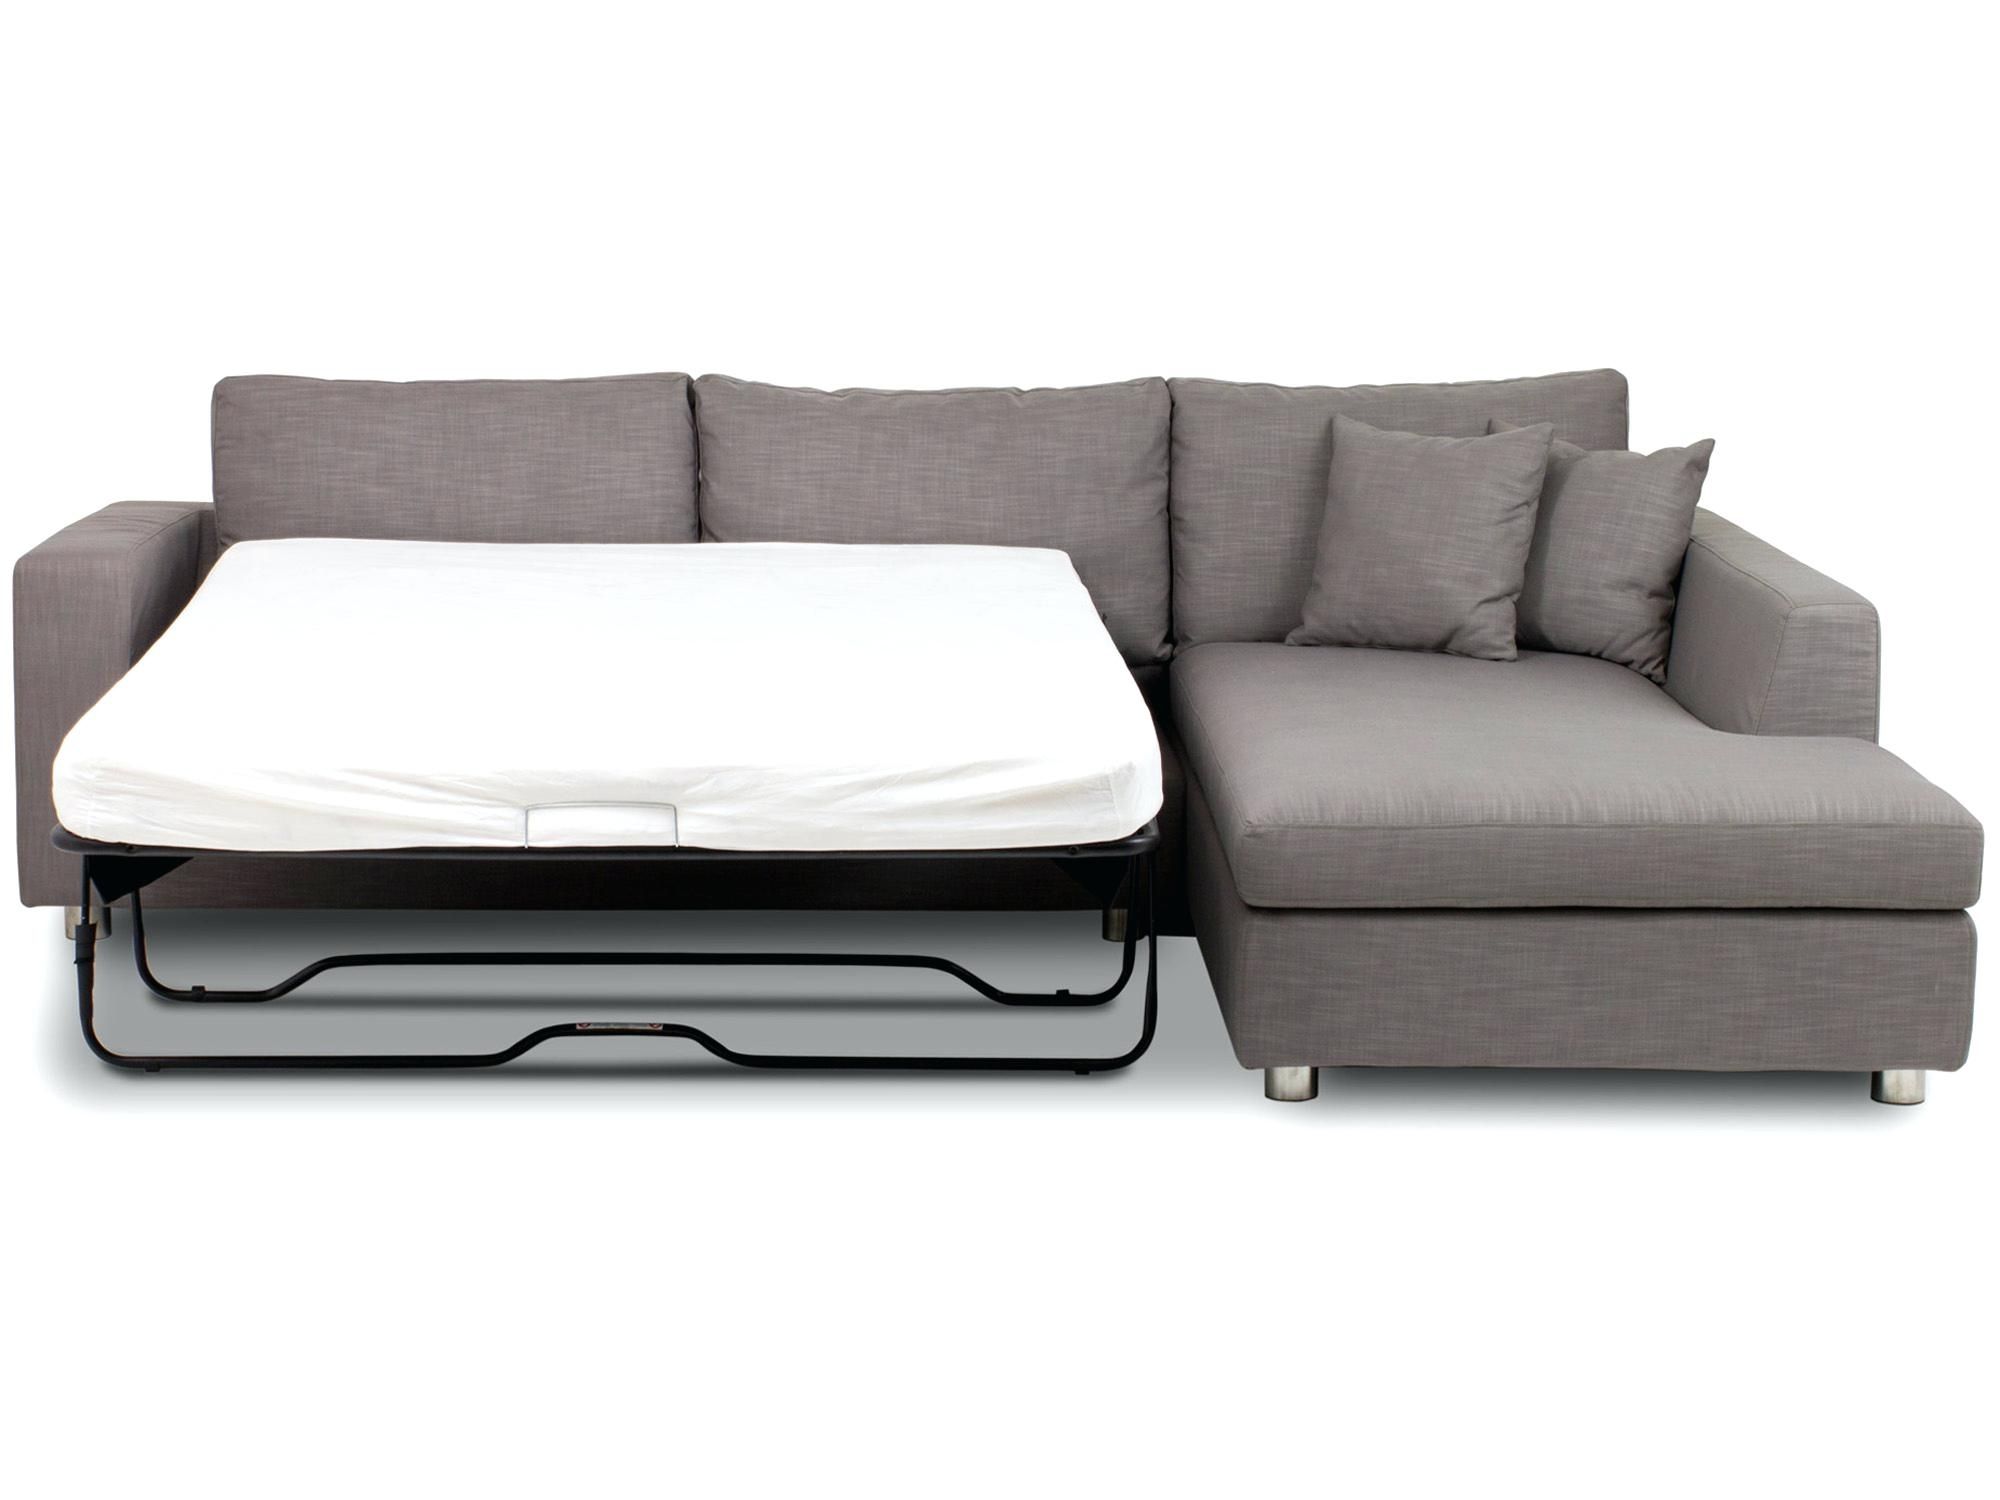 sofa bed and chaise lounge